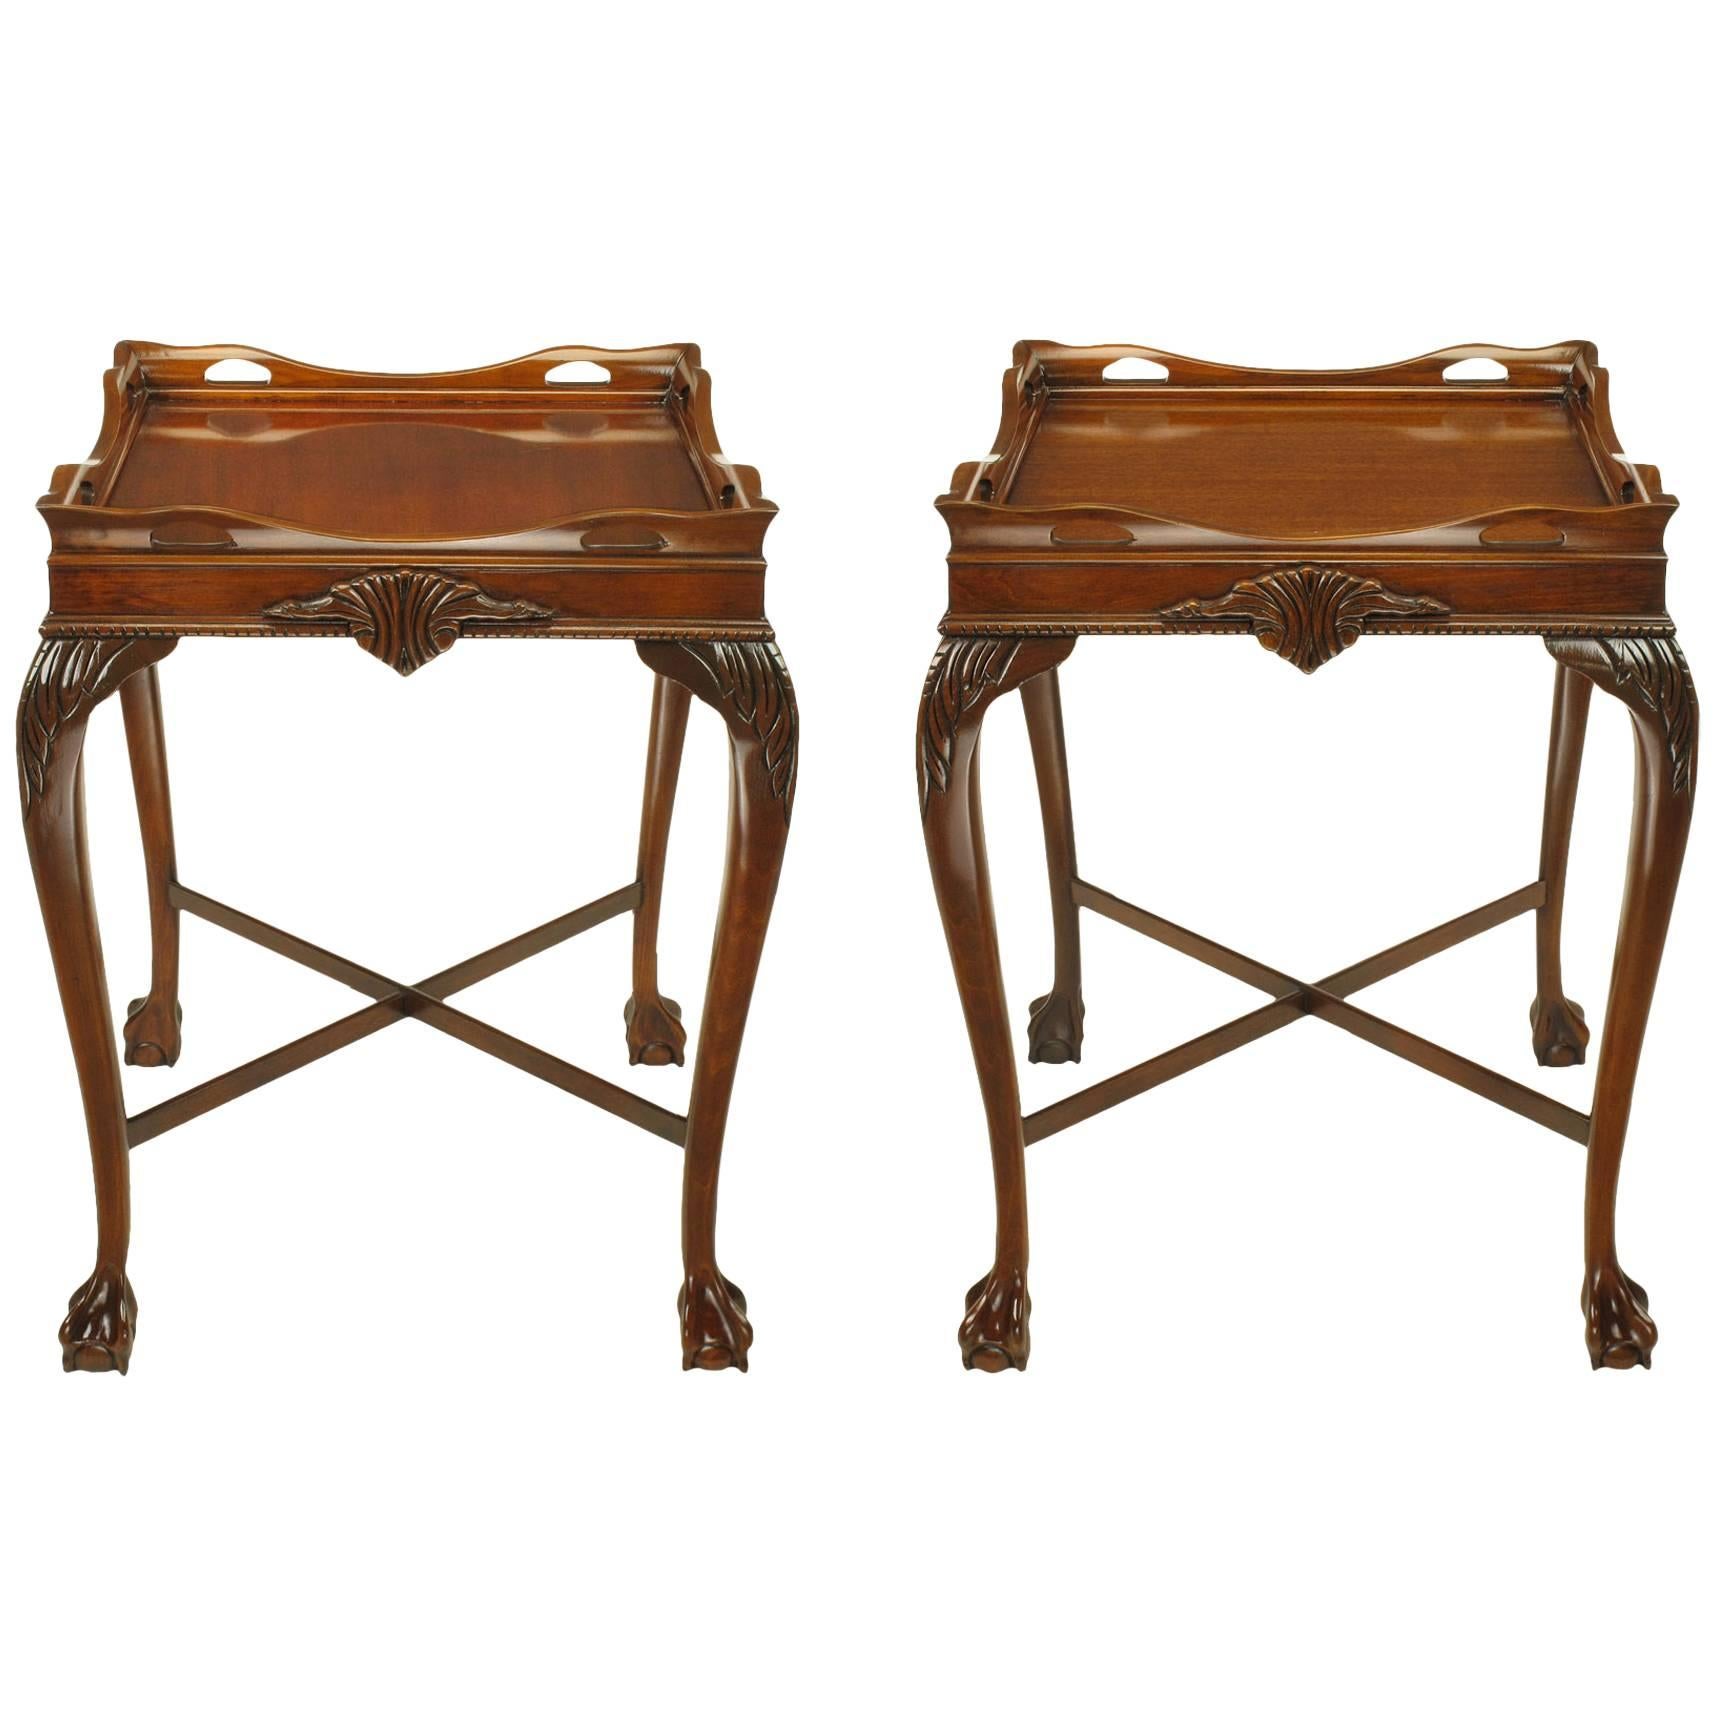 Pair of Mahogany Ball and Claw Footed George II Style End Tables For Sale